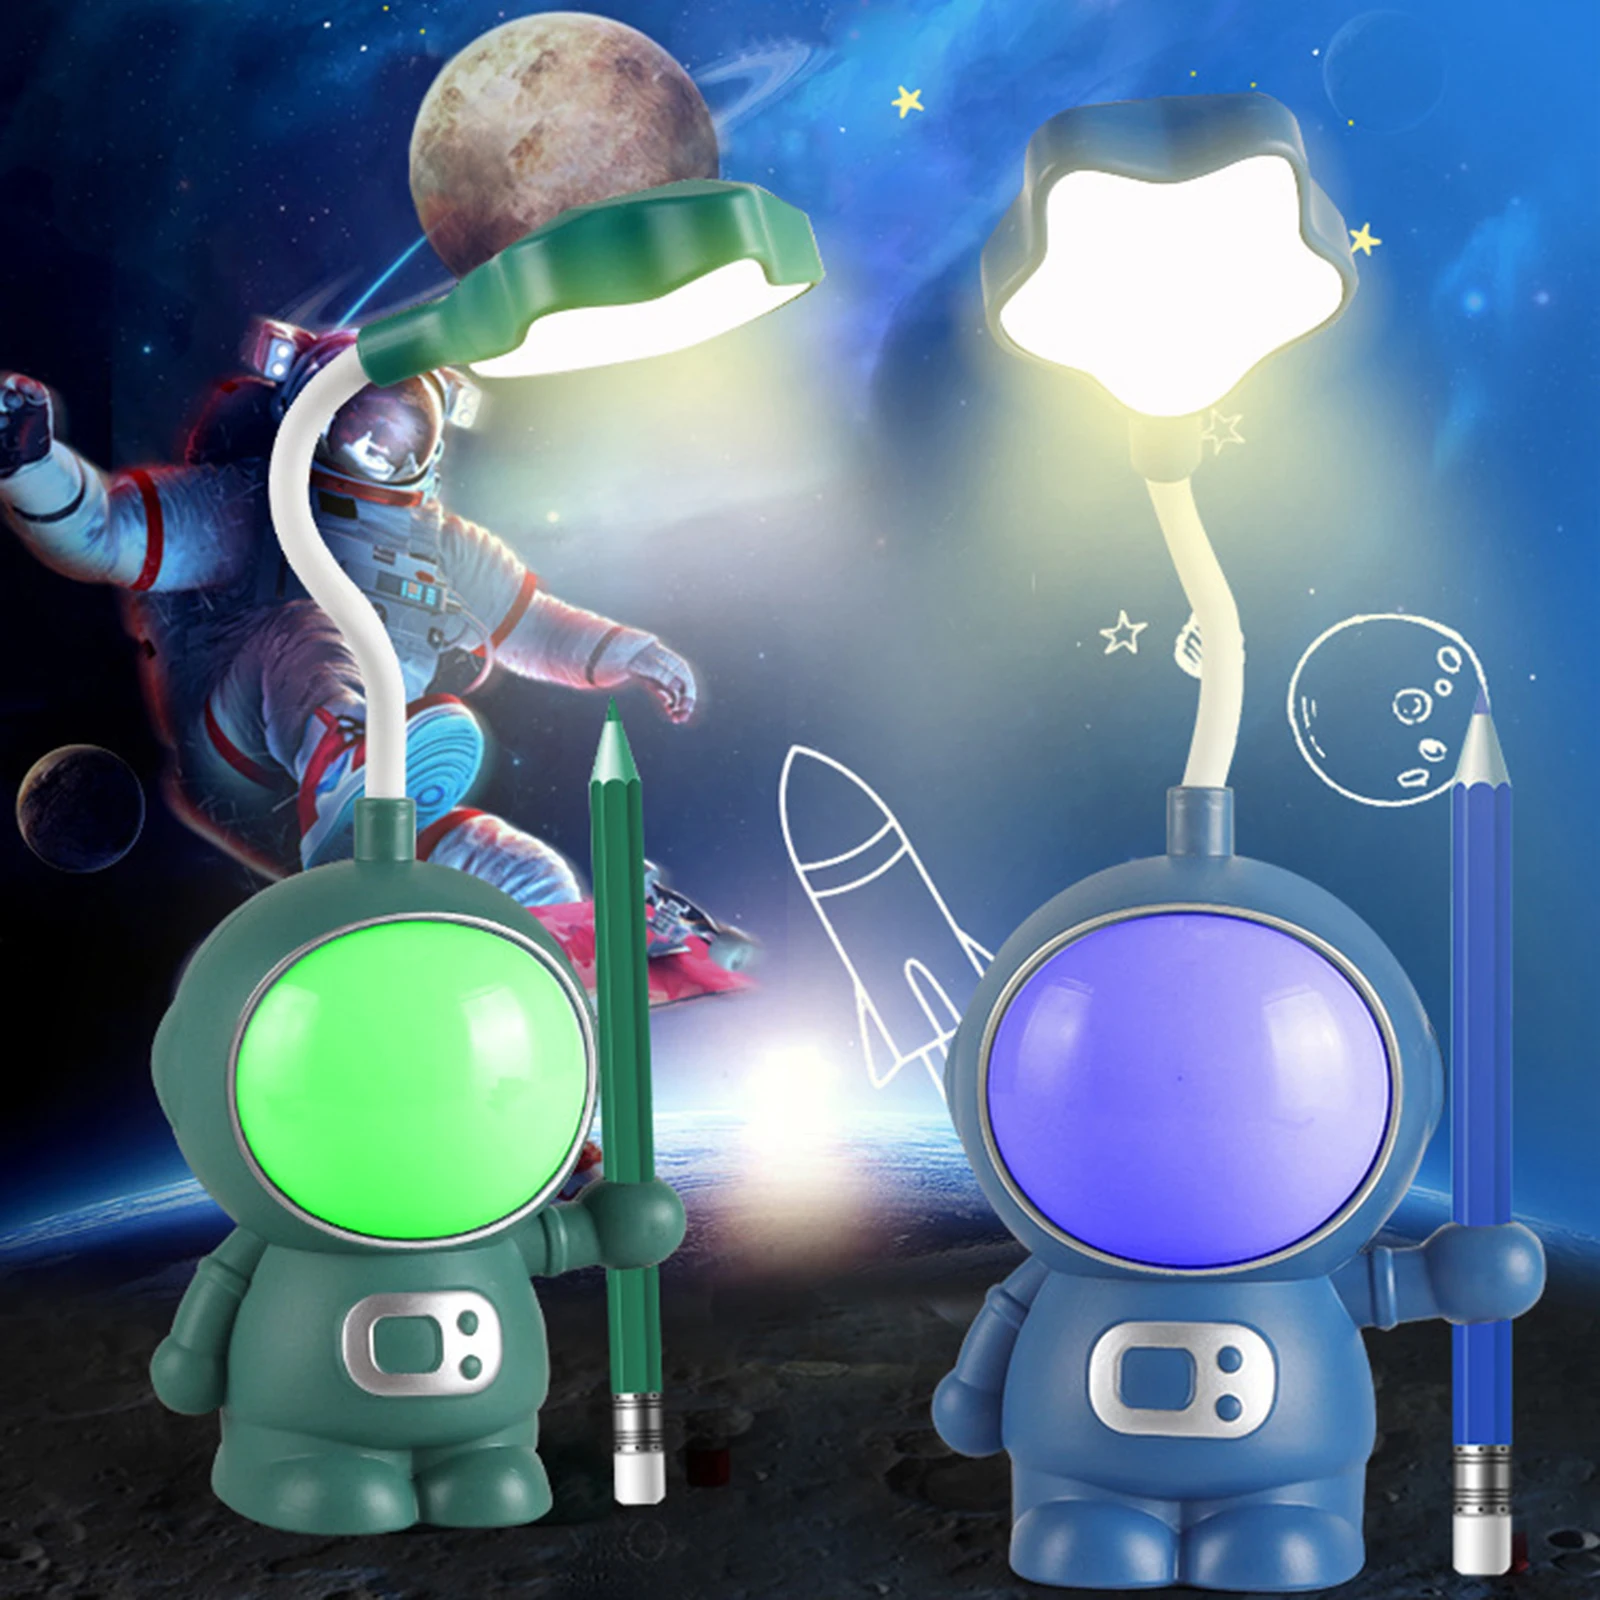 

LED Pen Holder Pencil Sharpening Cartoon Astronaut Desk Lamp Eye Protection 2 Gears Dimmable USB Charging for Student Dormitory